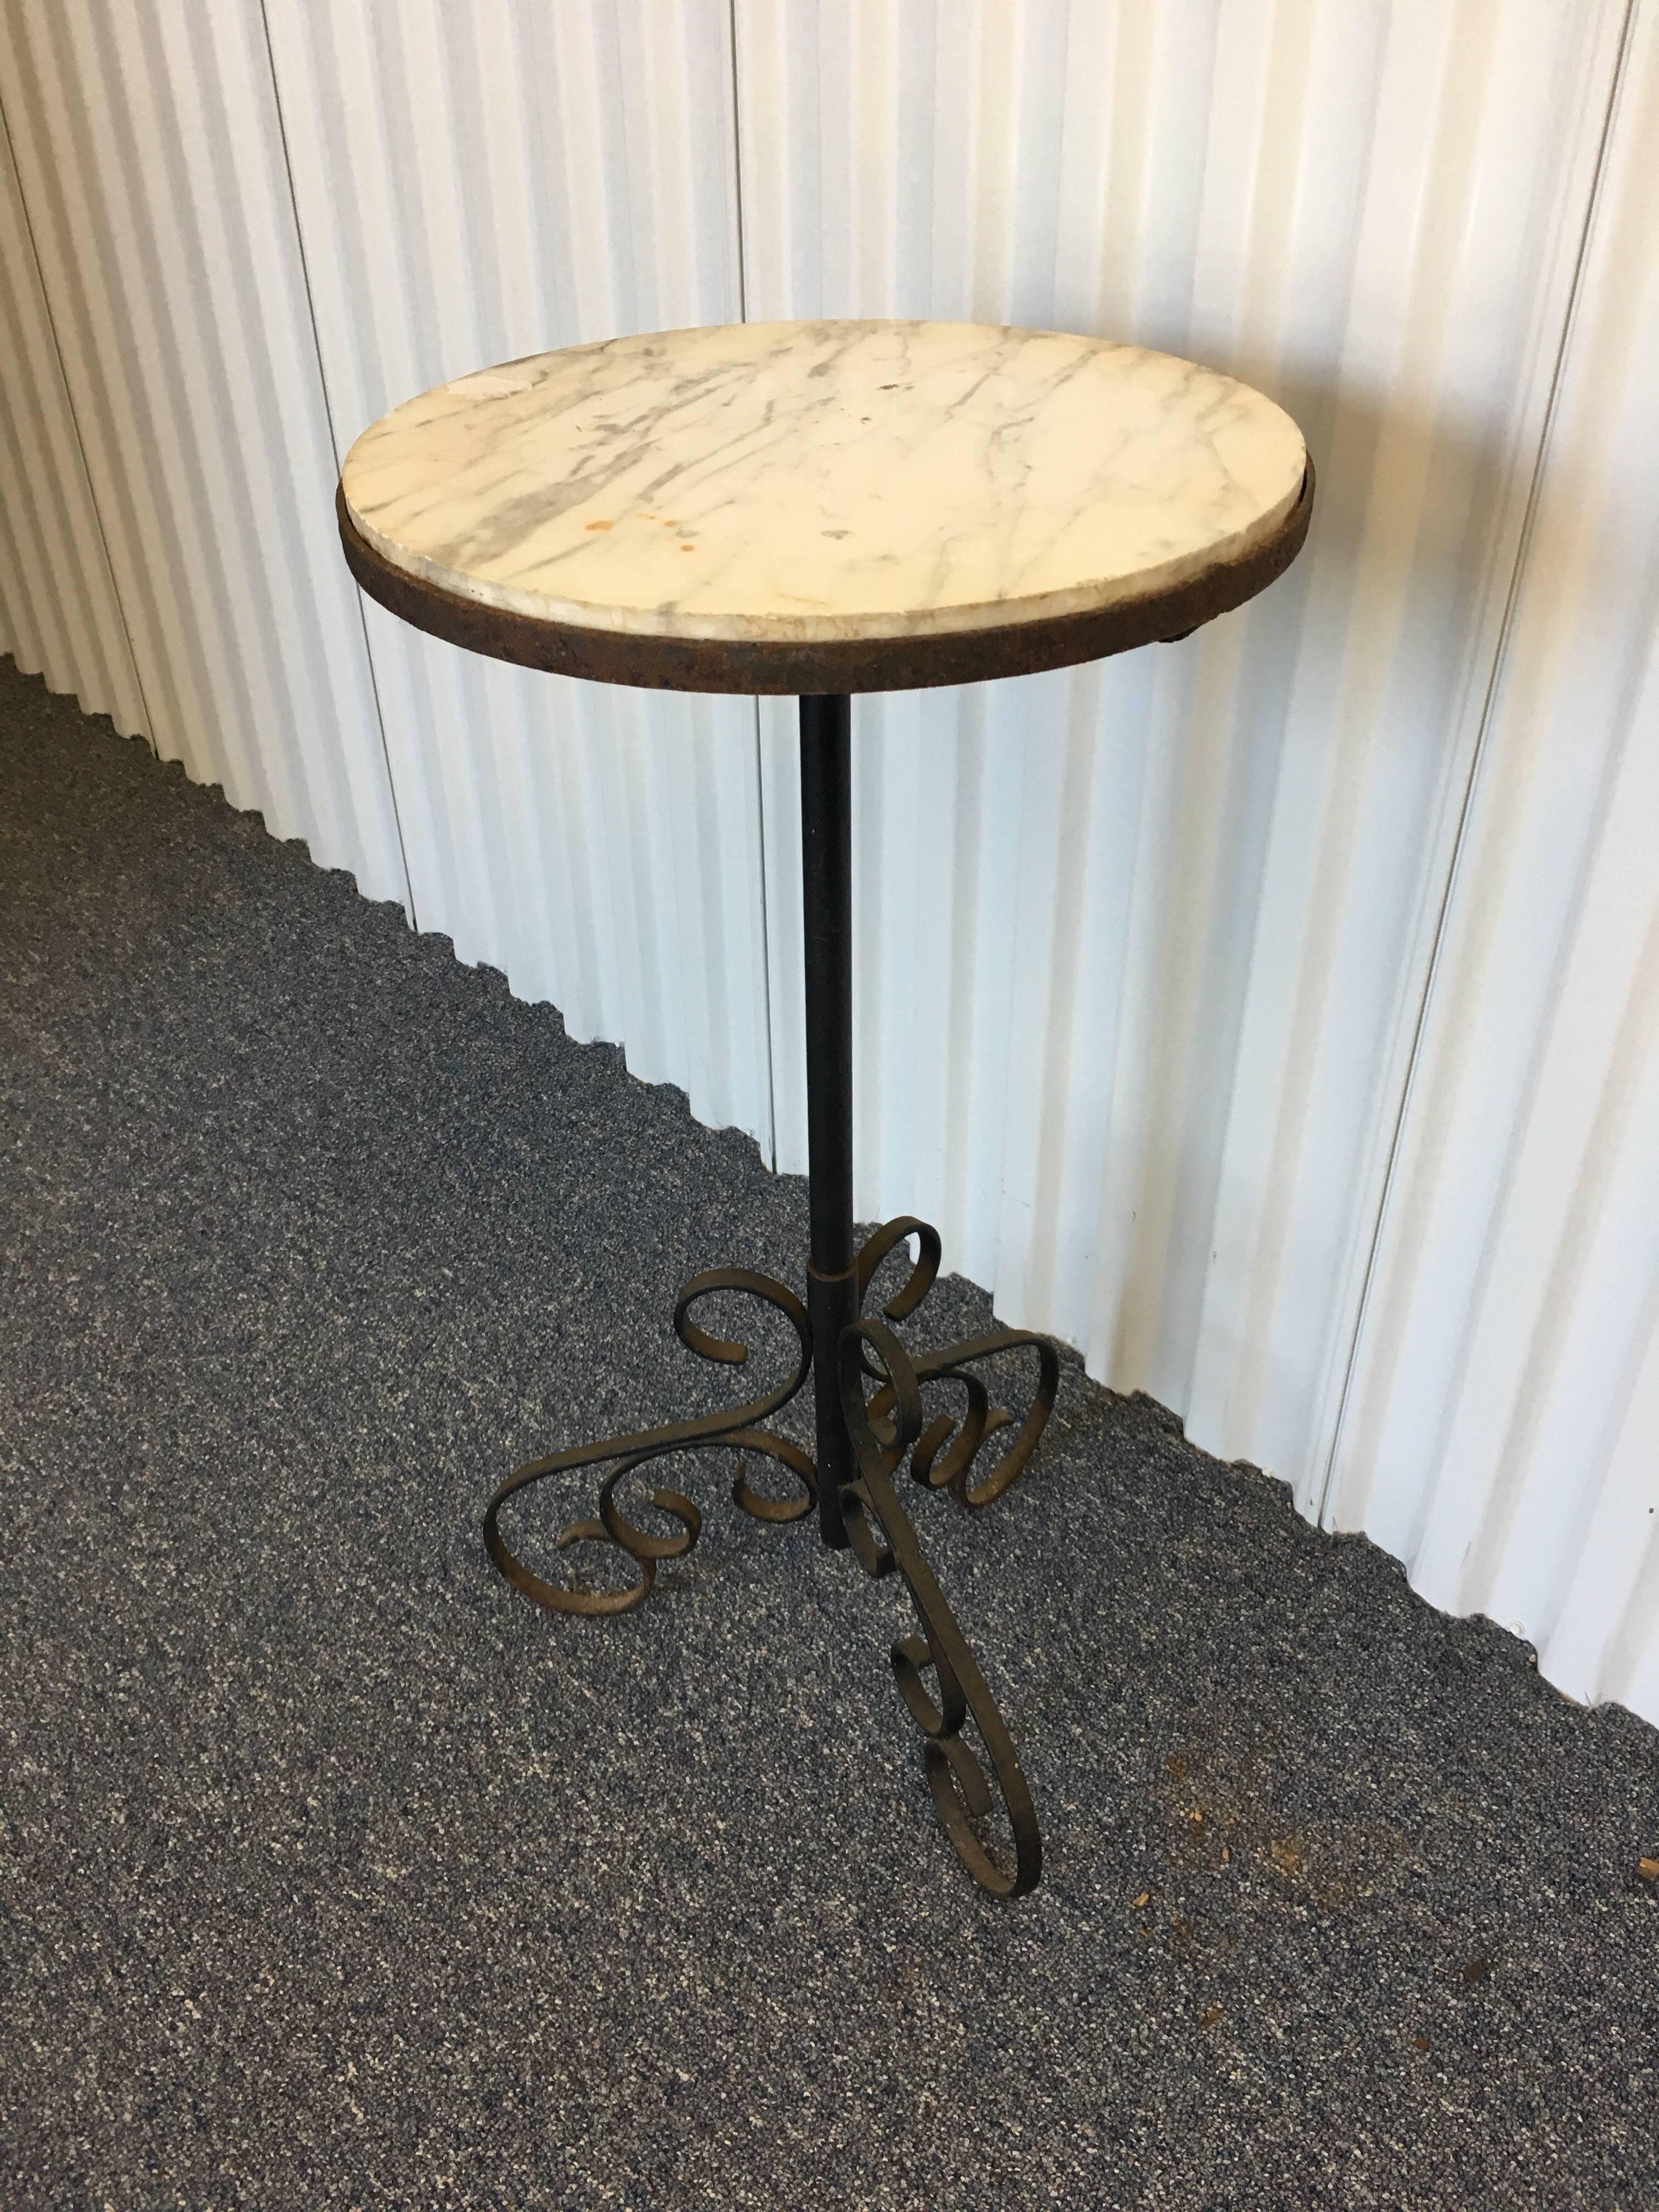 French 19th century iron and marble-top table with scrolled feet.
Table could be used as a side table or plant stand.